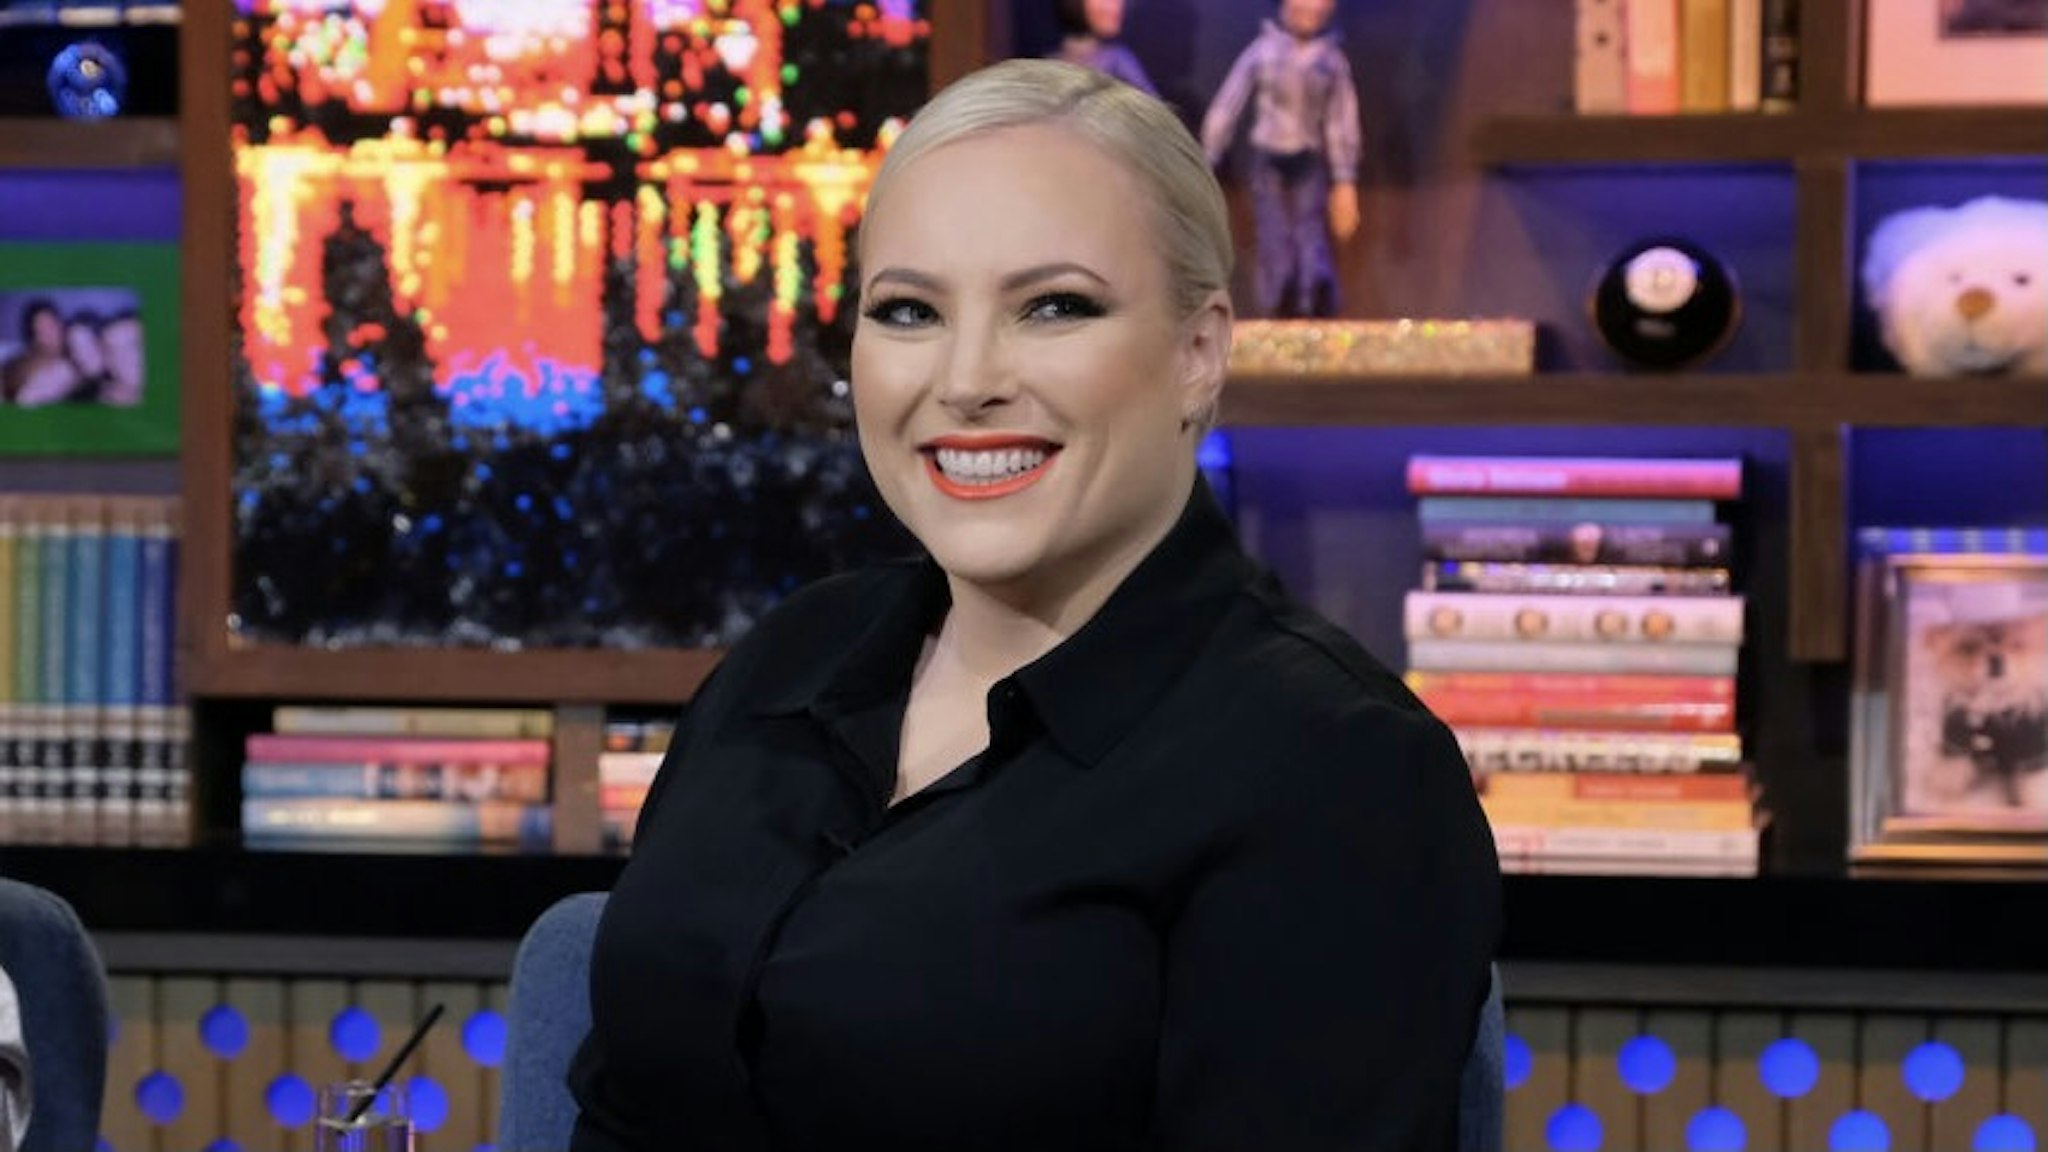 WATCH WHAT HAPPENS LIVE WITH ANDY COHEN -- Episode 16148 -- Pictured: Meghan McCain -- (Photo by: Charles Sykes/Bravo/NBCU Photo Bank)